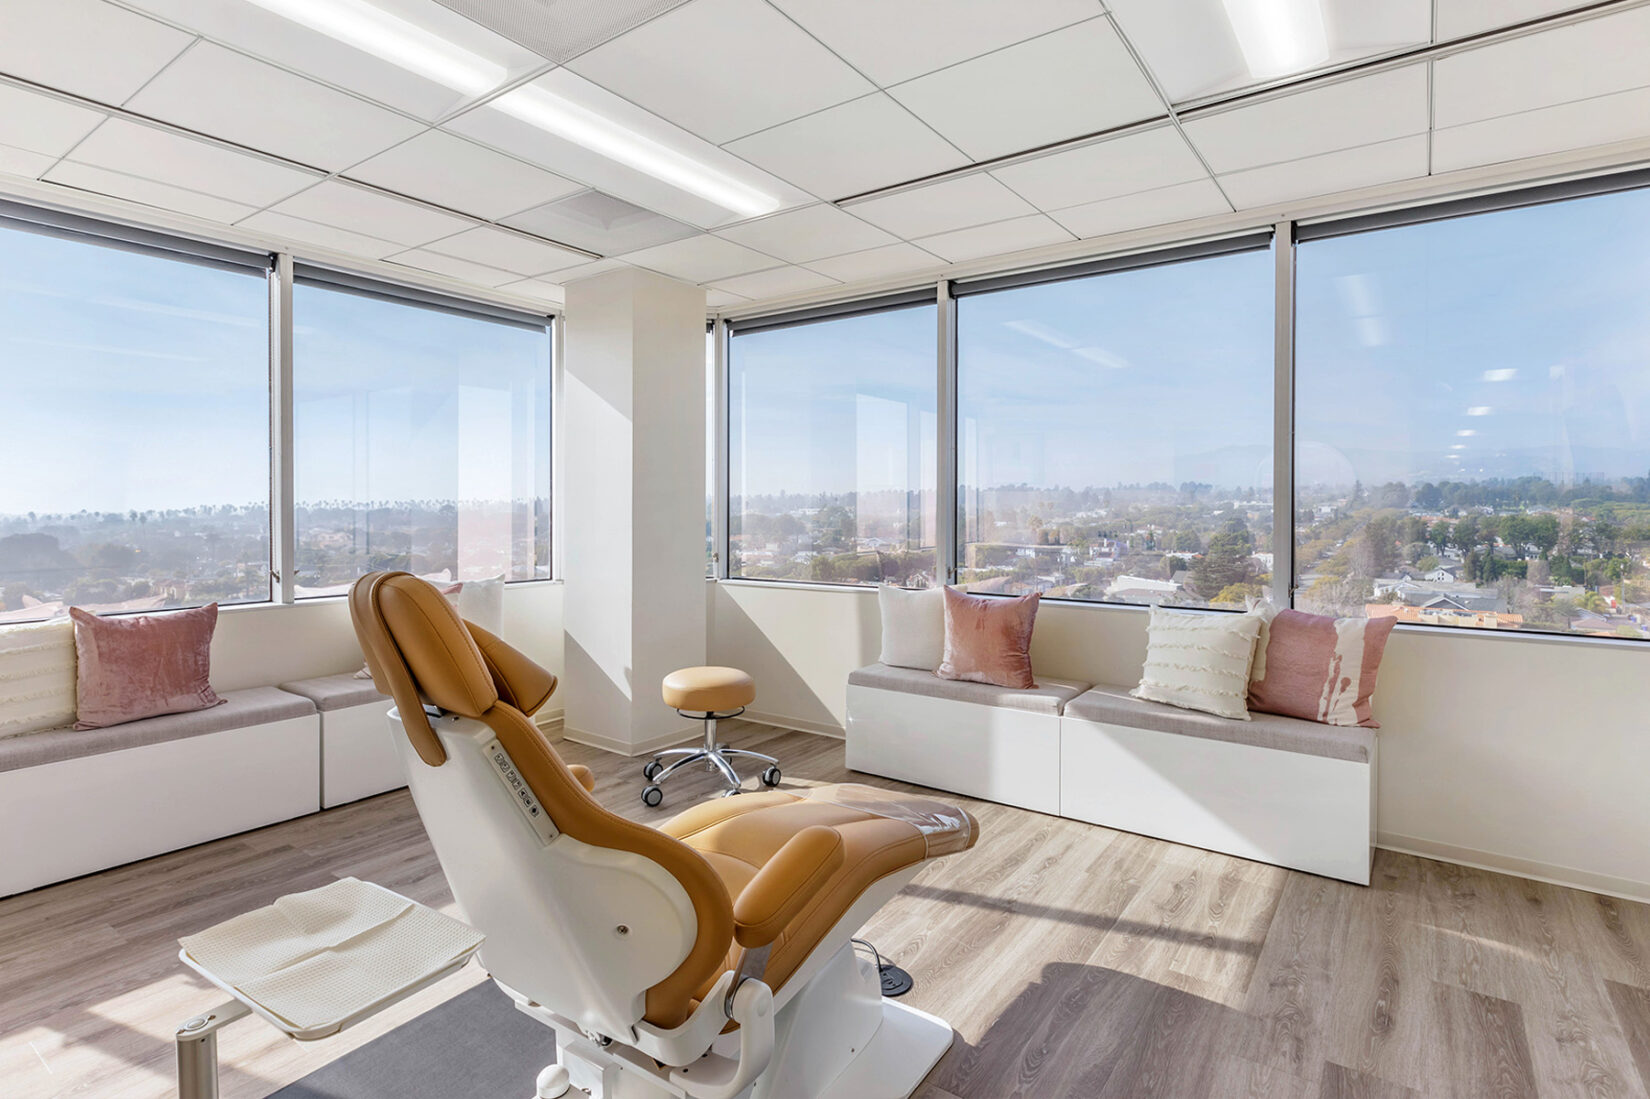 Upscale Dental Office with City Views